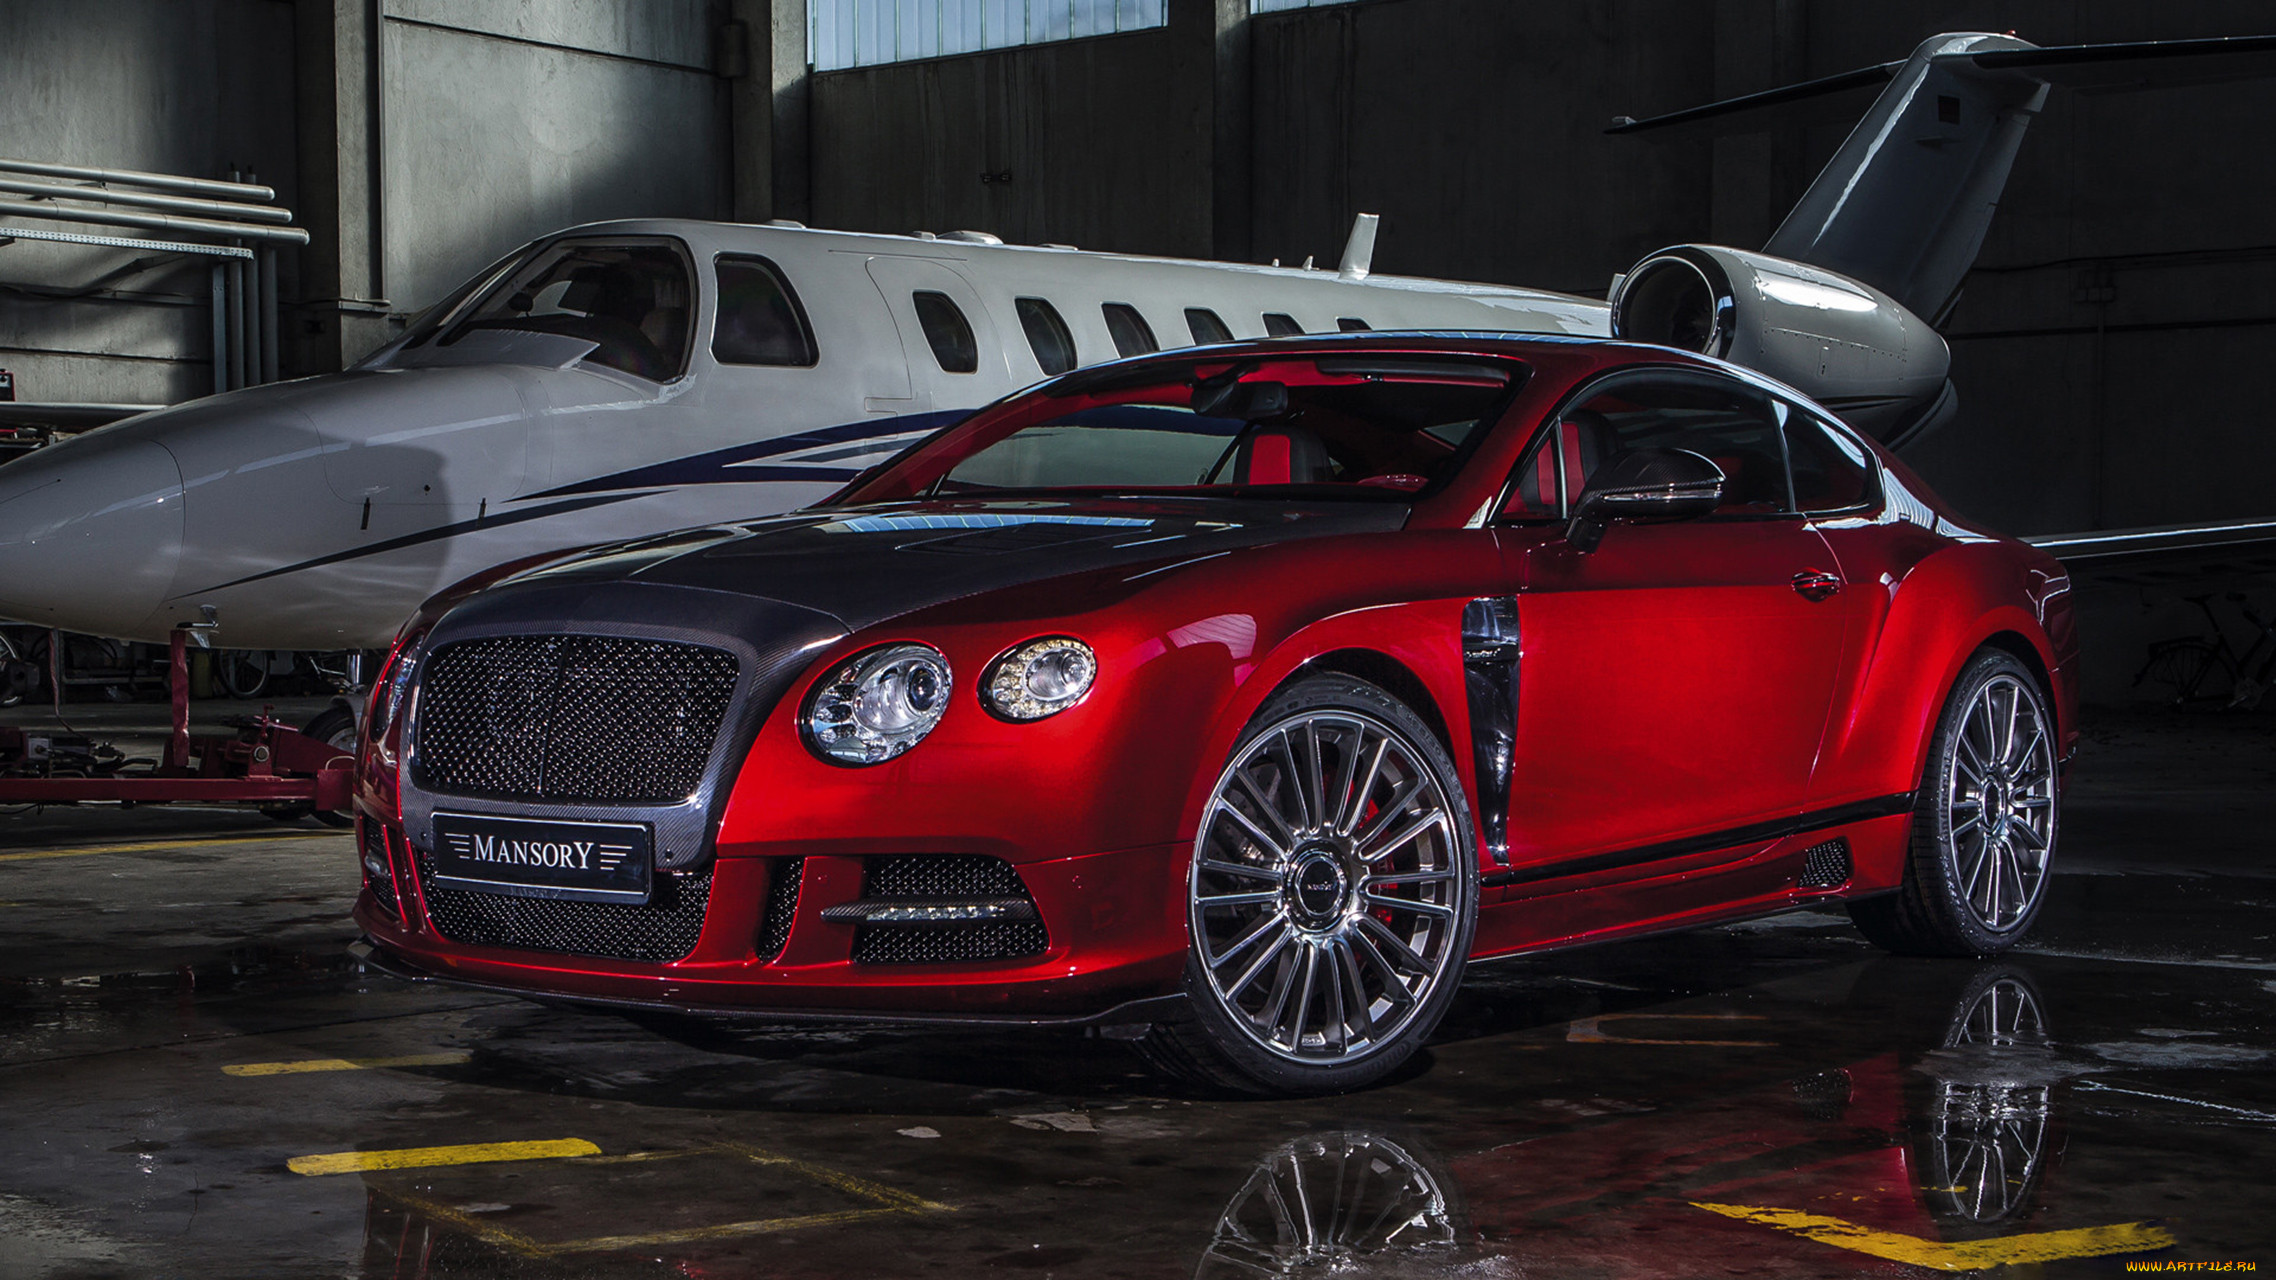 mansory sanguis based on bentley continental gt 2013, , bentley, mansory, sanguis, based, continental, gt, 2013